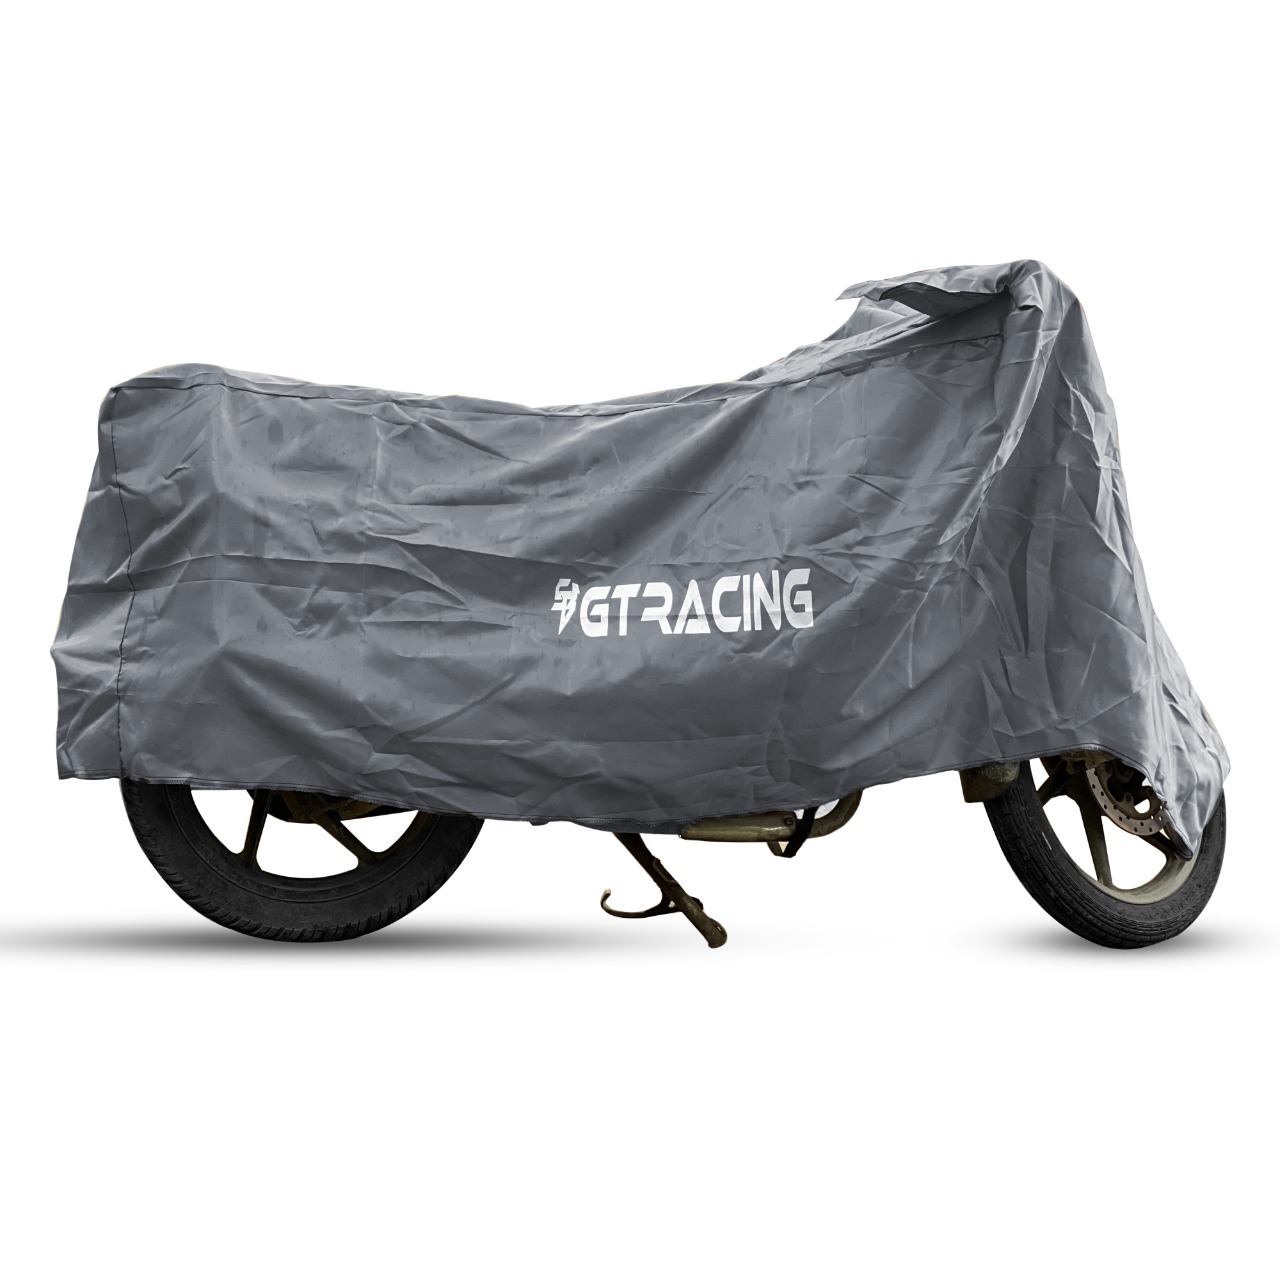 Steelbird Bike Cover GT Racing UV Protection Water-Resistant & Dustproof (2X2 Grey), Bike Body Cover With Carry Bag (All Bikes Upto Cruiser Bikes Size)